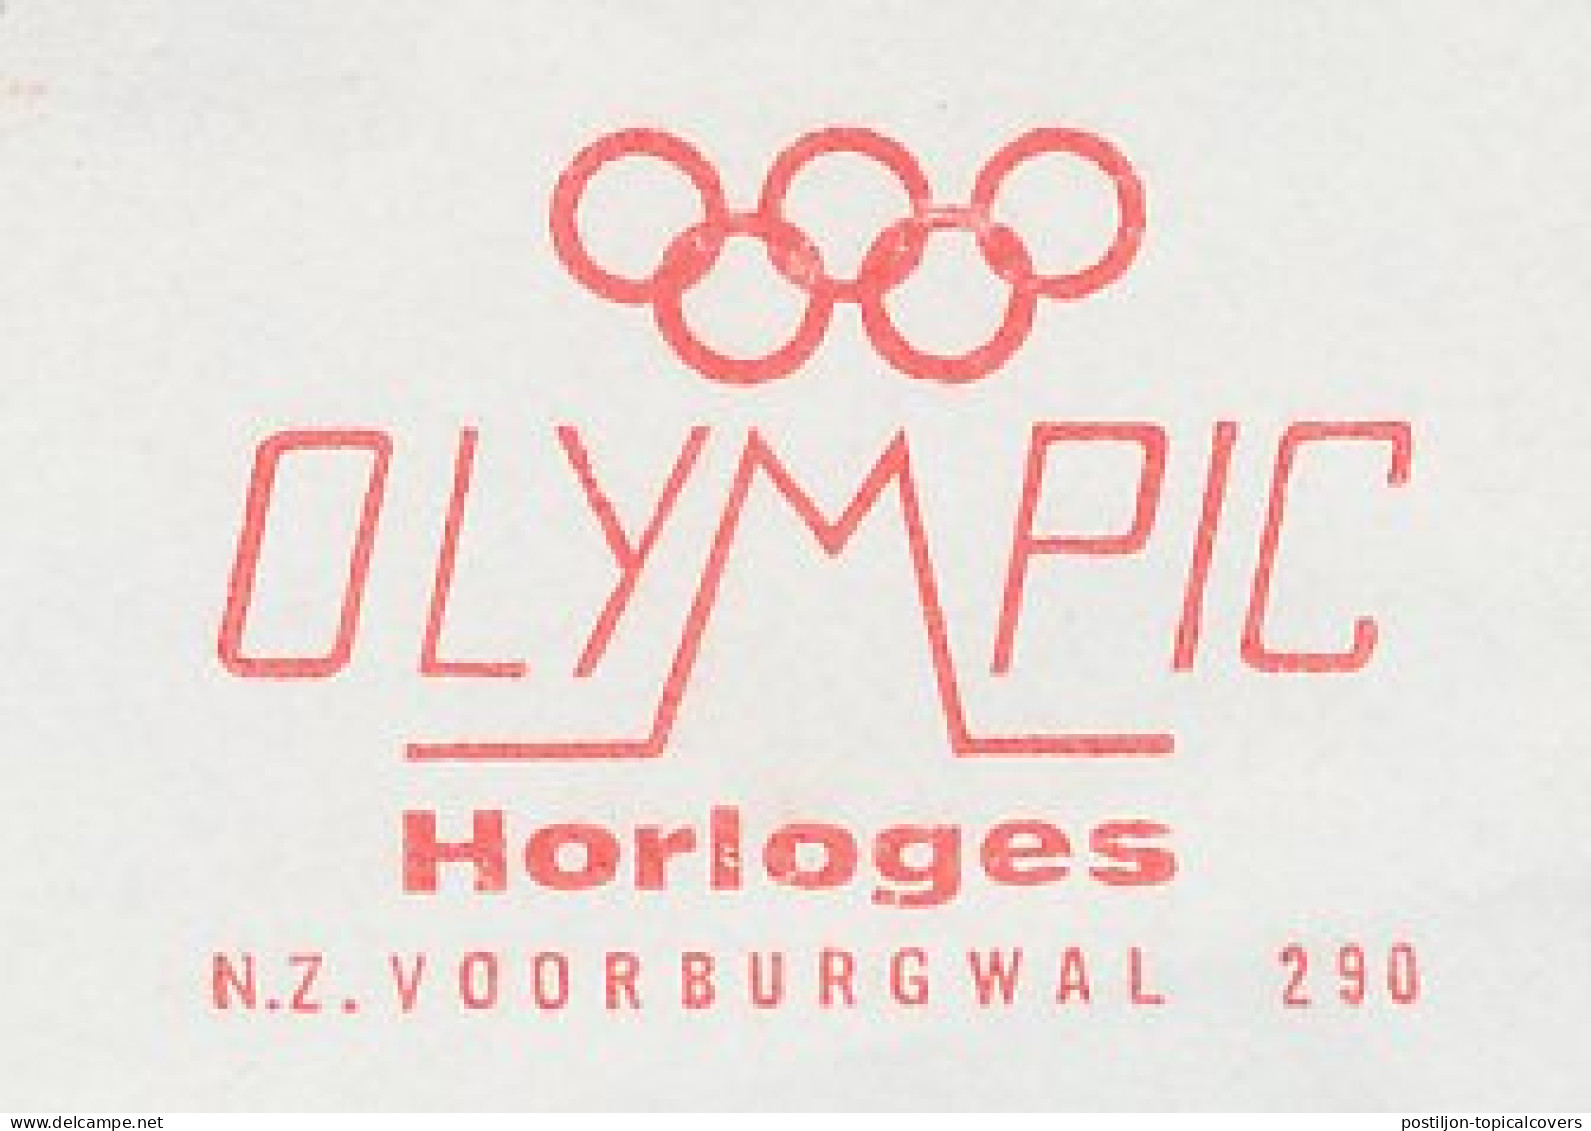 Meter Cover Netherlands 1971 Watch - Olympic - Relojería